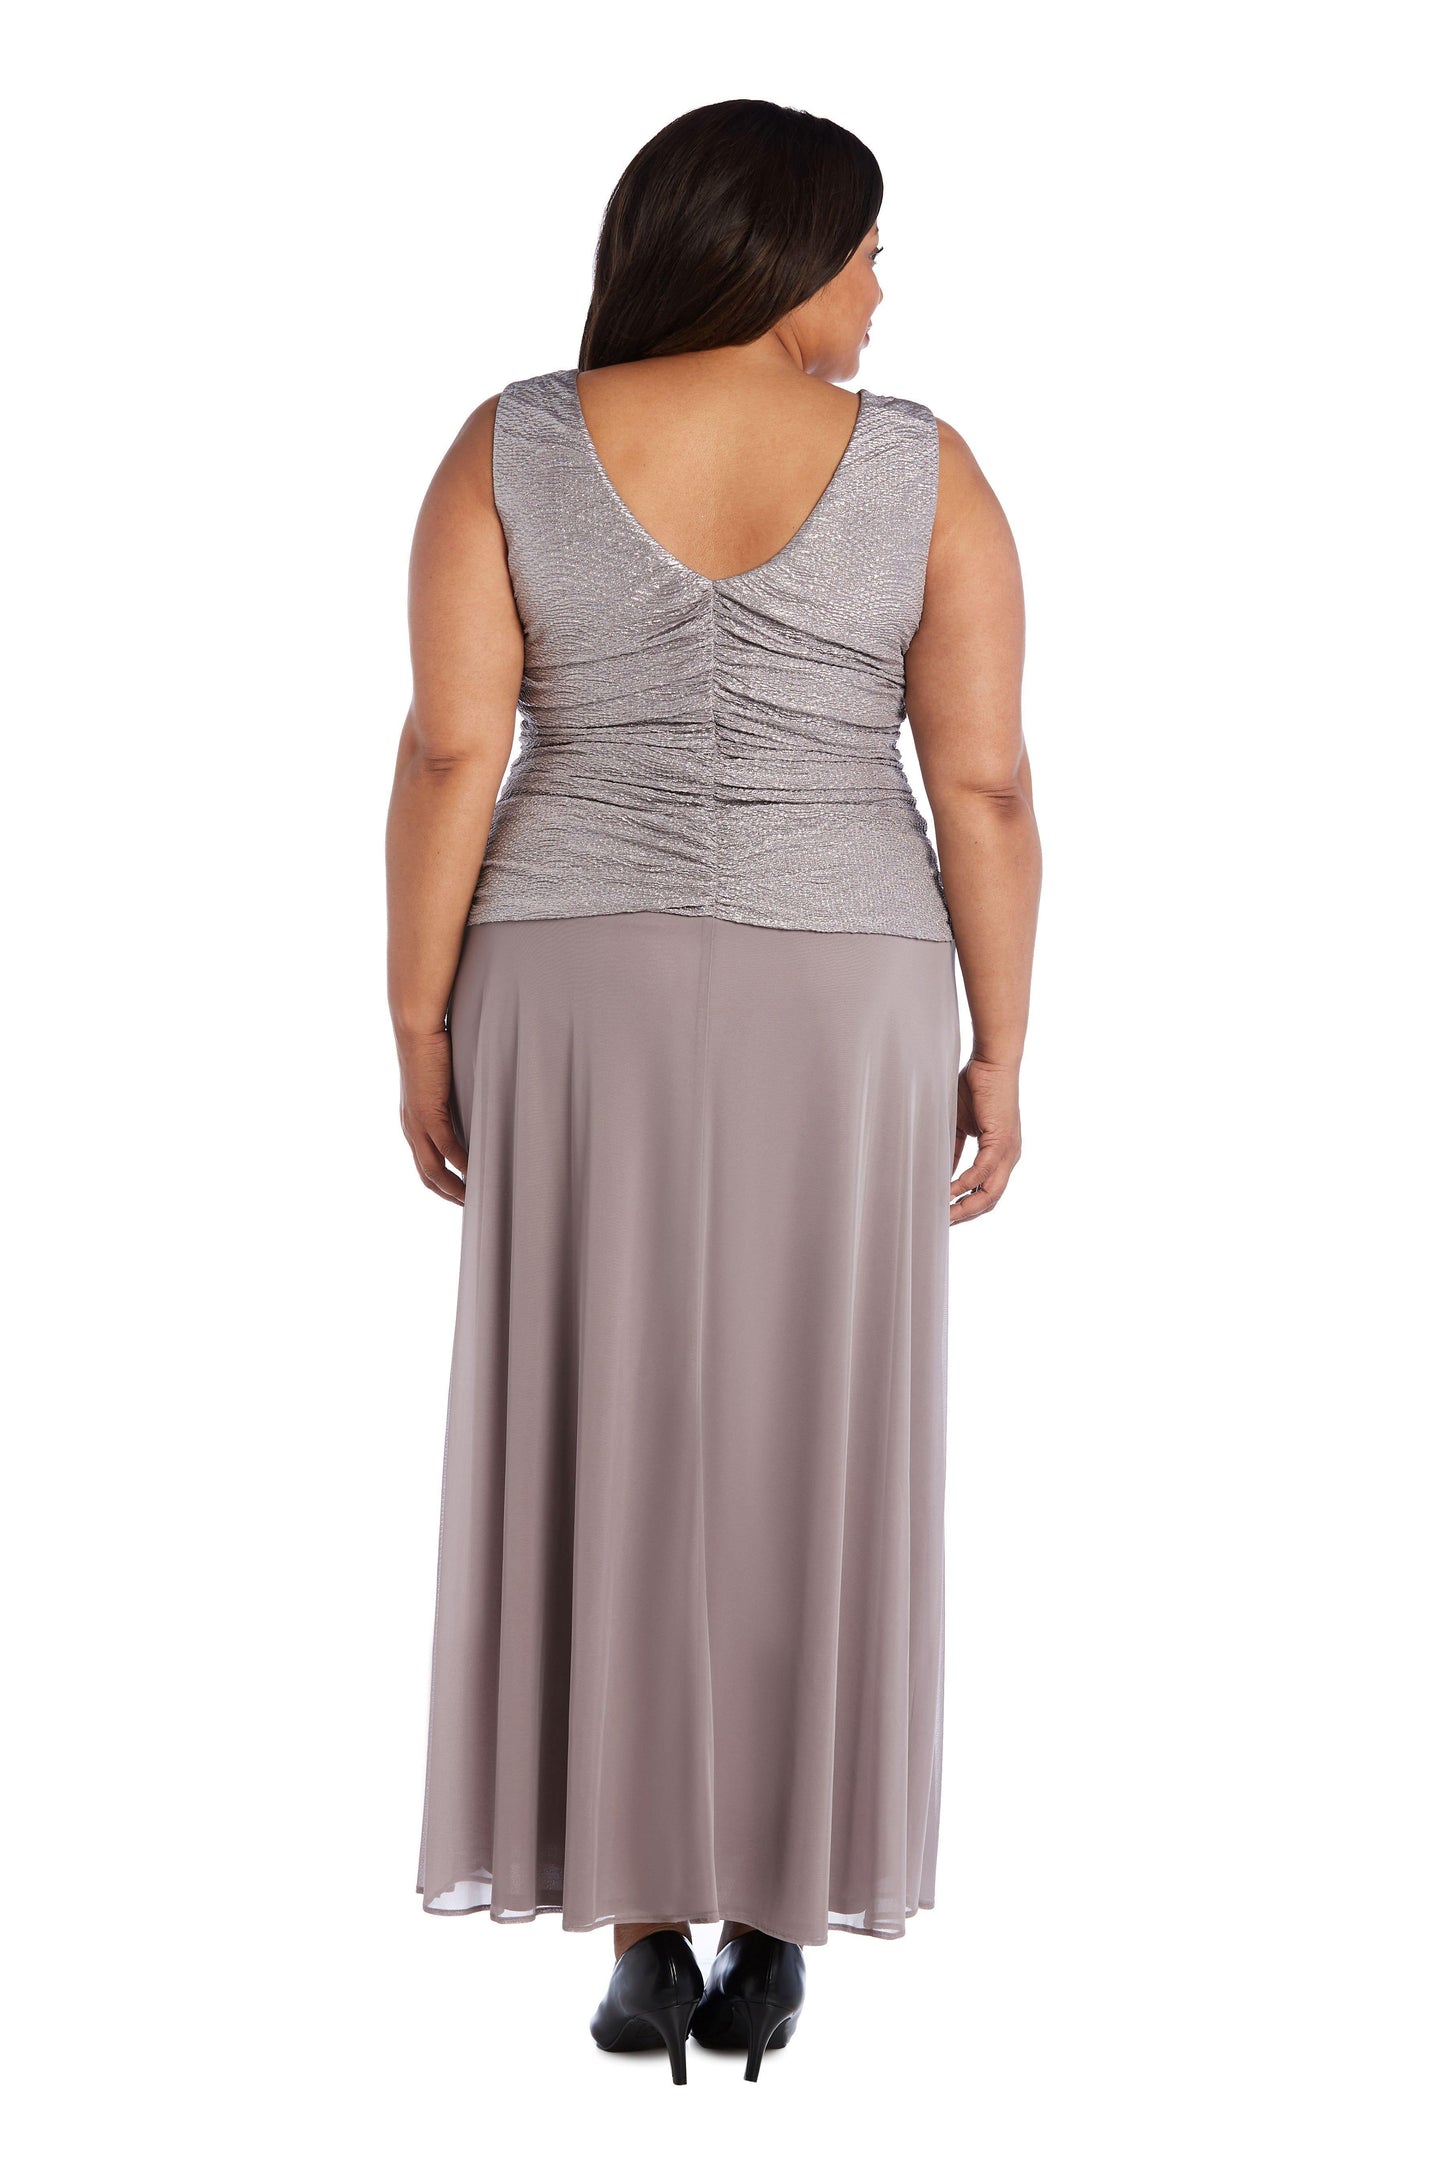 R&M Richards Plus Size Mother of the Bride Dress 9657W - The Dress Outlet